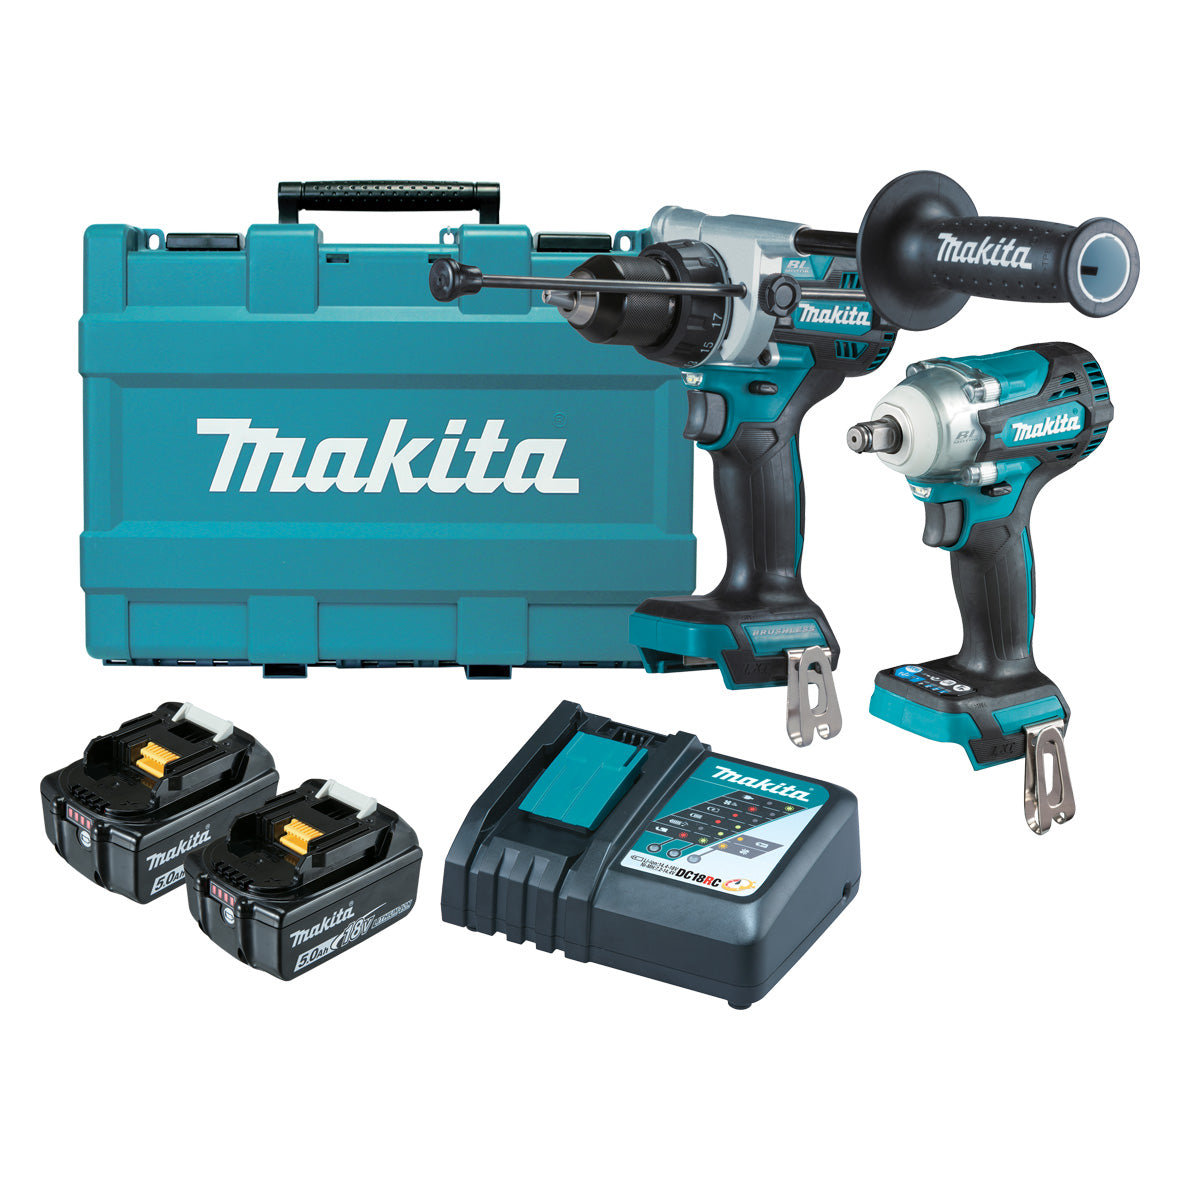 18V 5.0Ah 2Pce Brushless Hammer Driver Drill + Impact Wrench DLX2419T by Makita